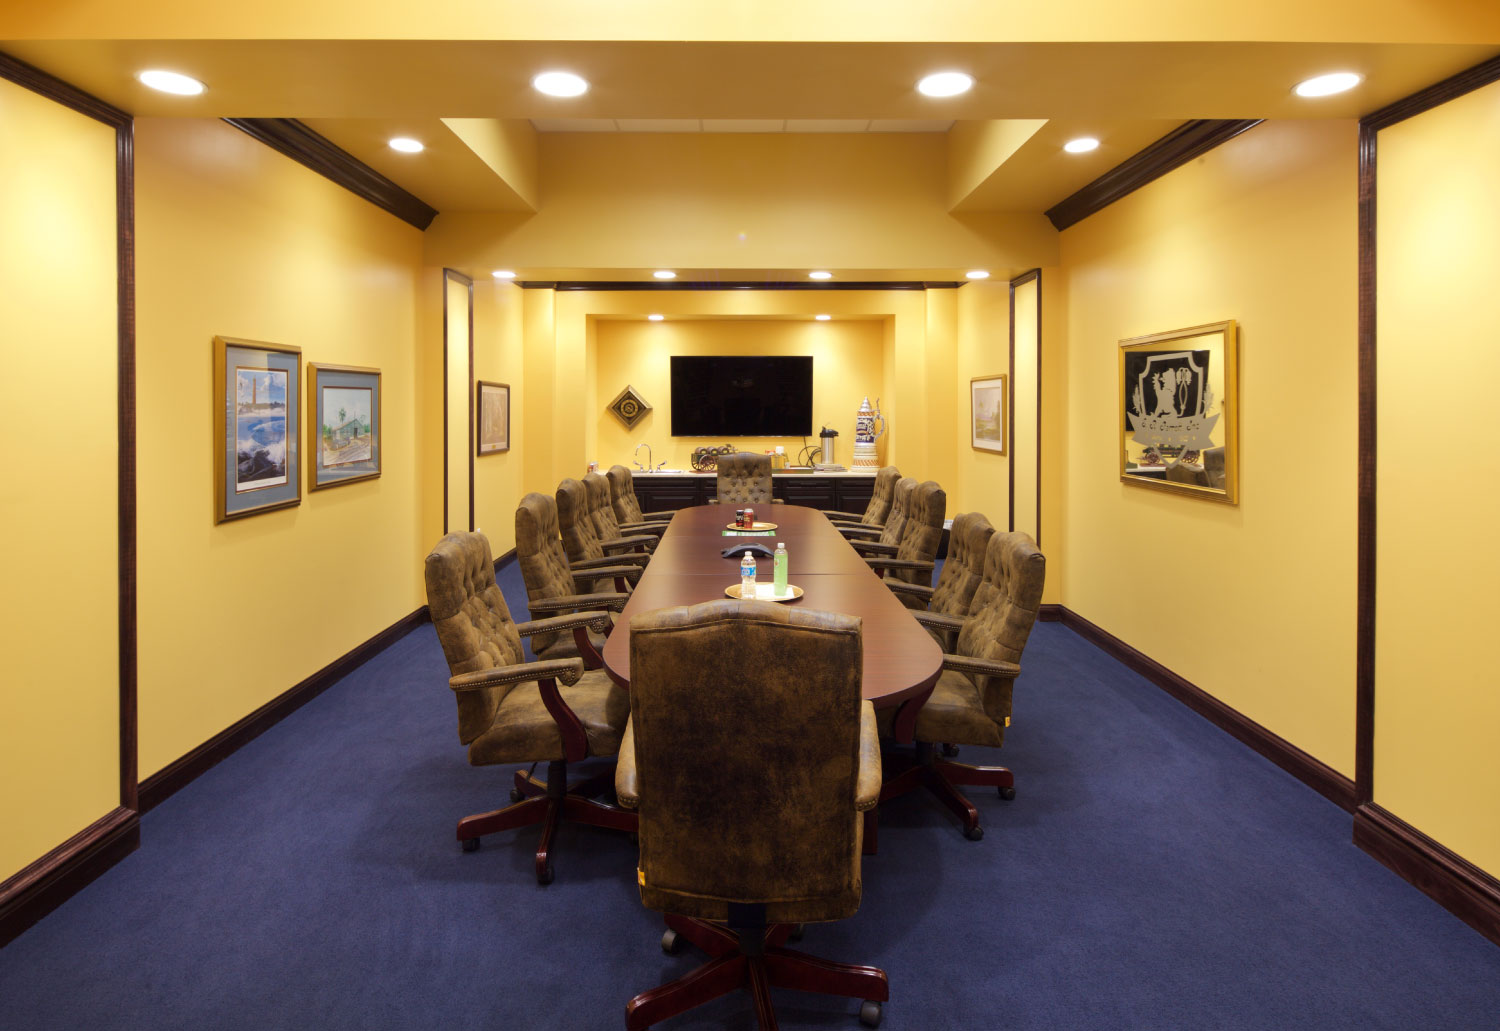 Conference Room at SR Perrott Distribution Facility Built by ARCO Beverage Group in Florida